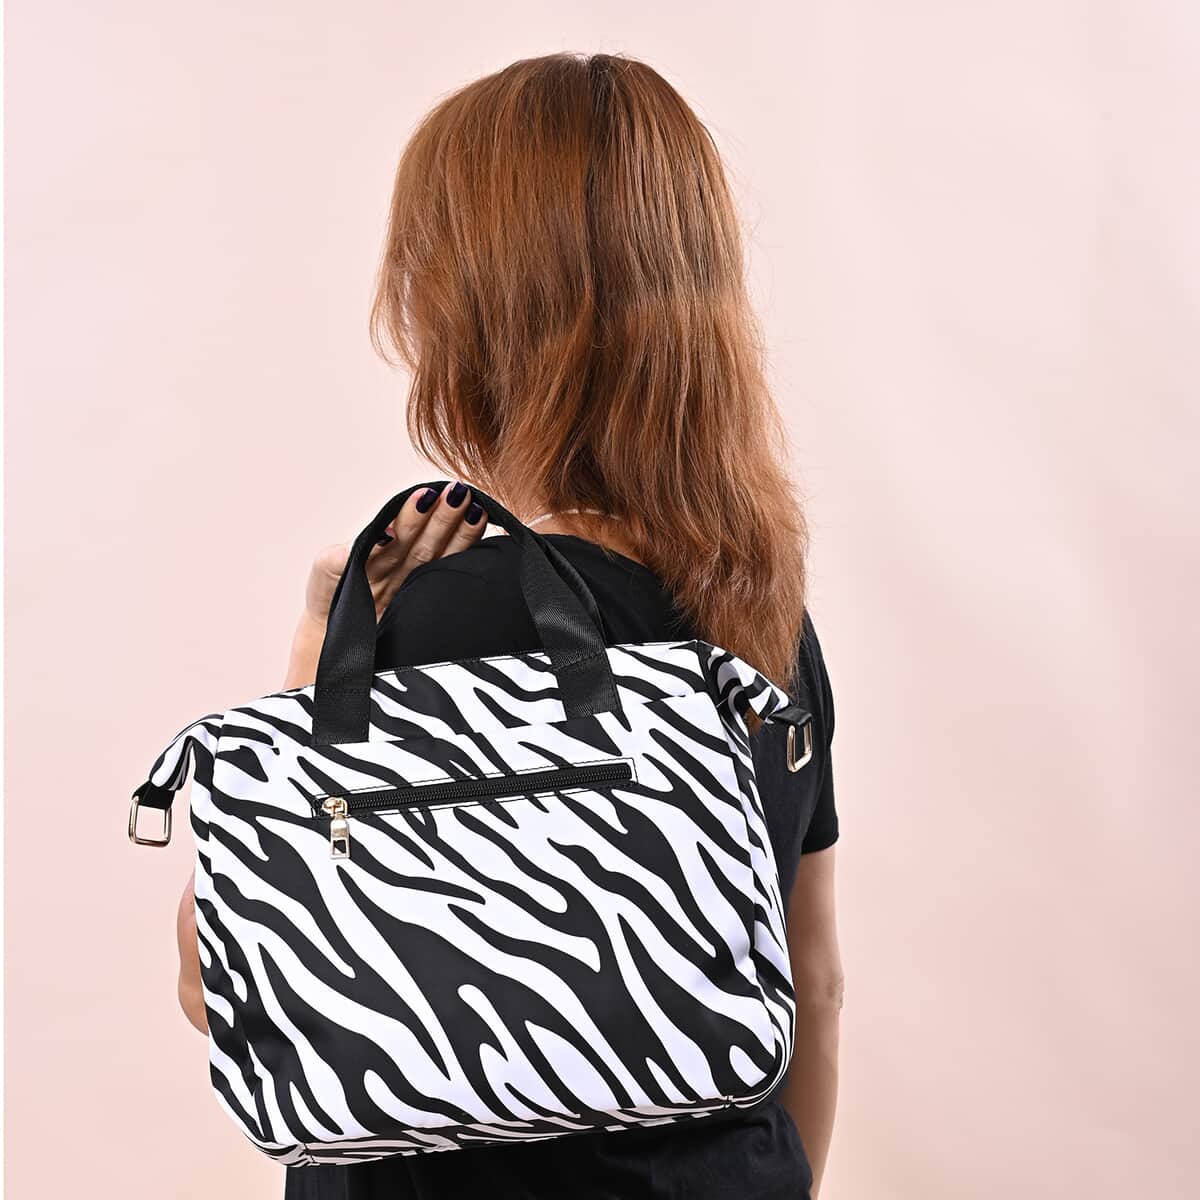 Black Color White Zebra Pattern Nylon Convertible Bag (12"x4"x11.5") with Handle and Shoulder Strap image number 2